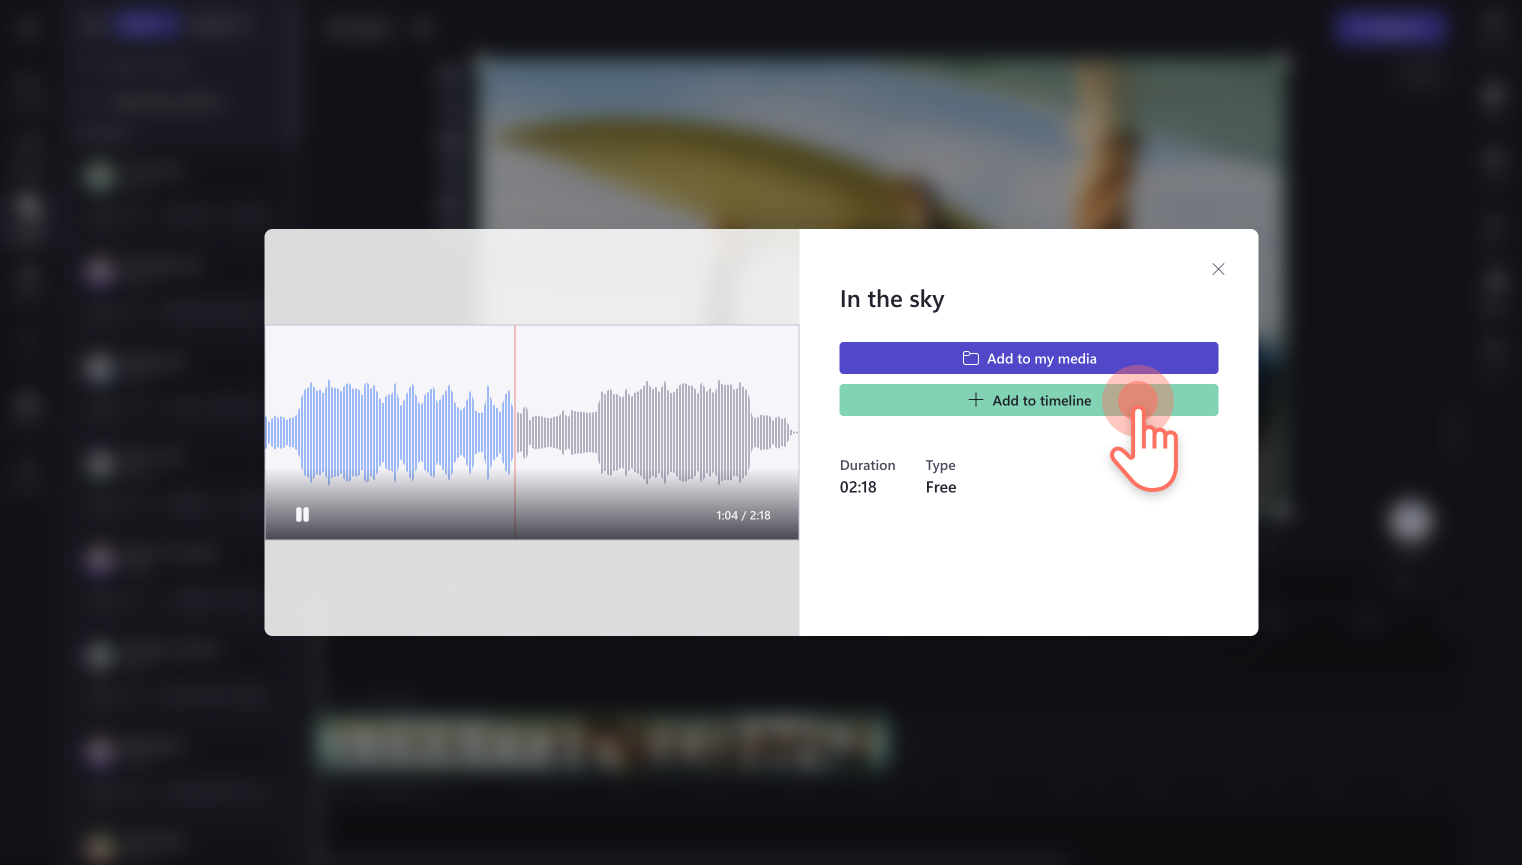 An image of a user viewing a music track in full screen then clicking add to timeline.